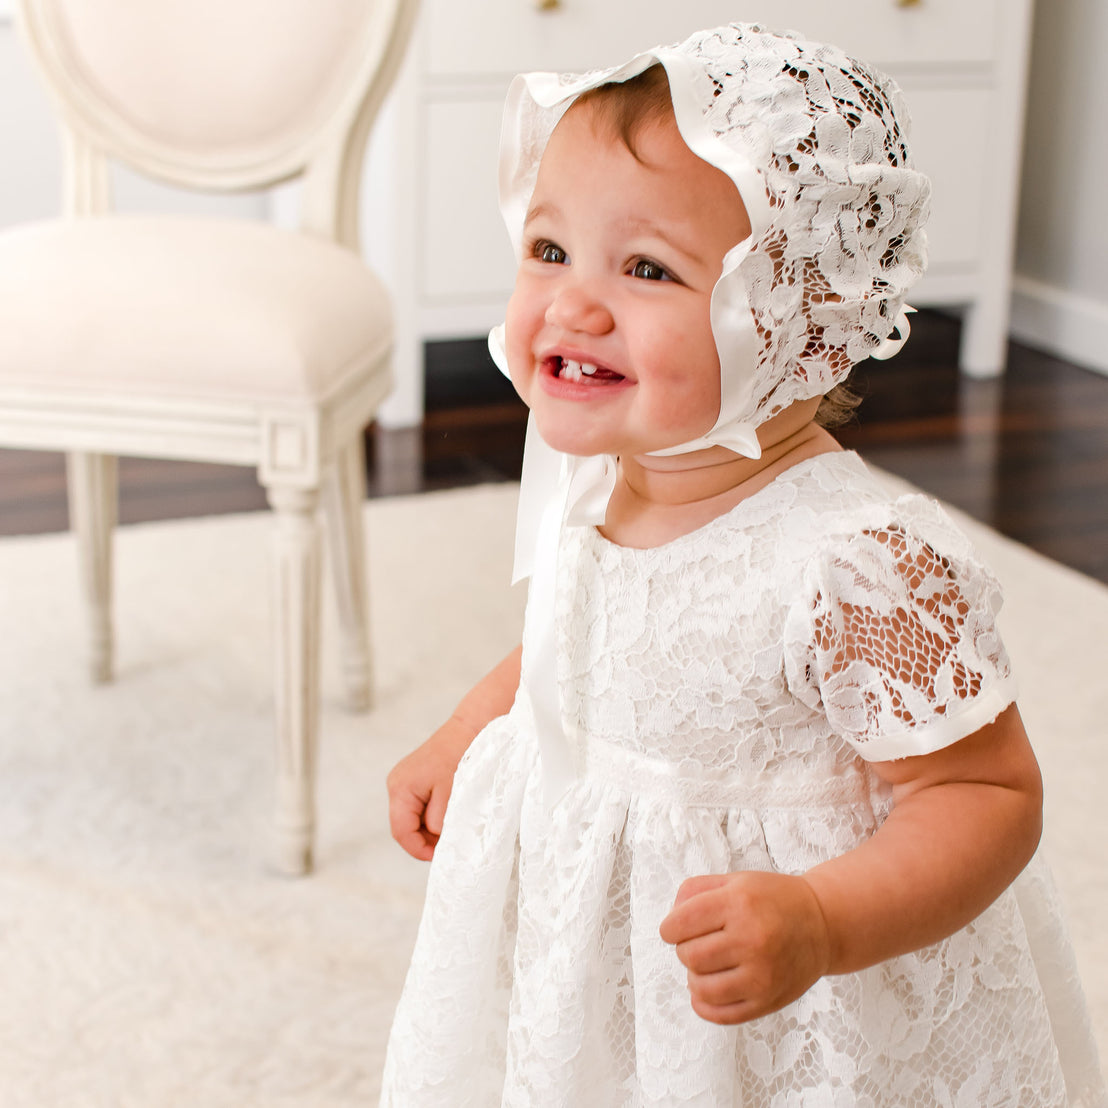 A toddler in a white lace dress and a Handmade Babydollz Rose Lace Bonnet smiles brightly while standing on a wooden floor against a backdrop of a white chair and wall.